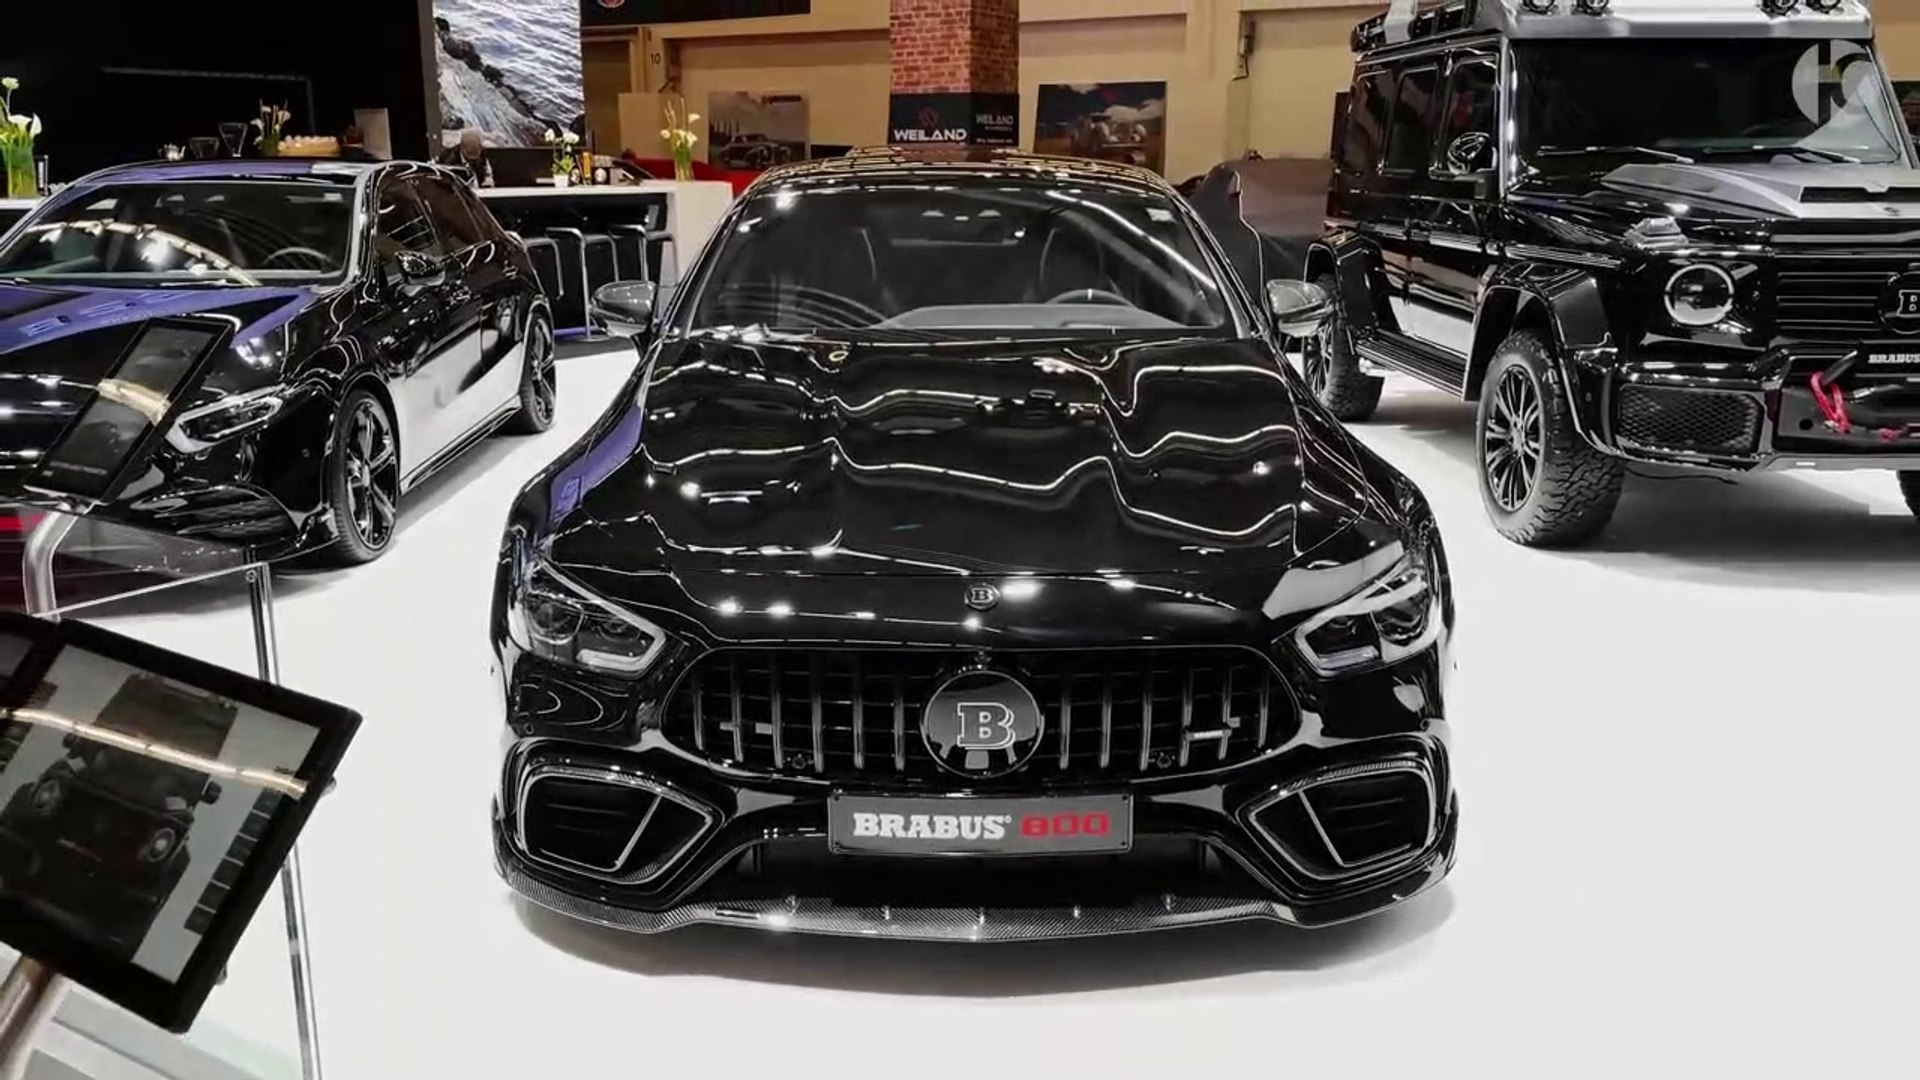 Brabus 800 Mercedes Amg Gt 63 S Interior And Exterior Details Video Dailymotion